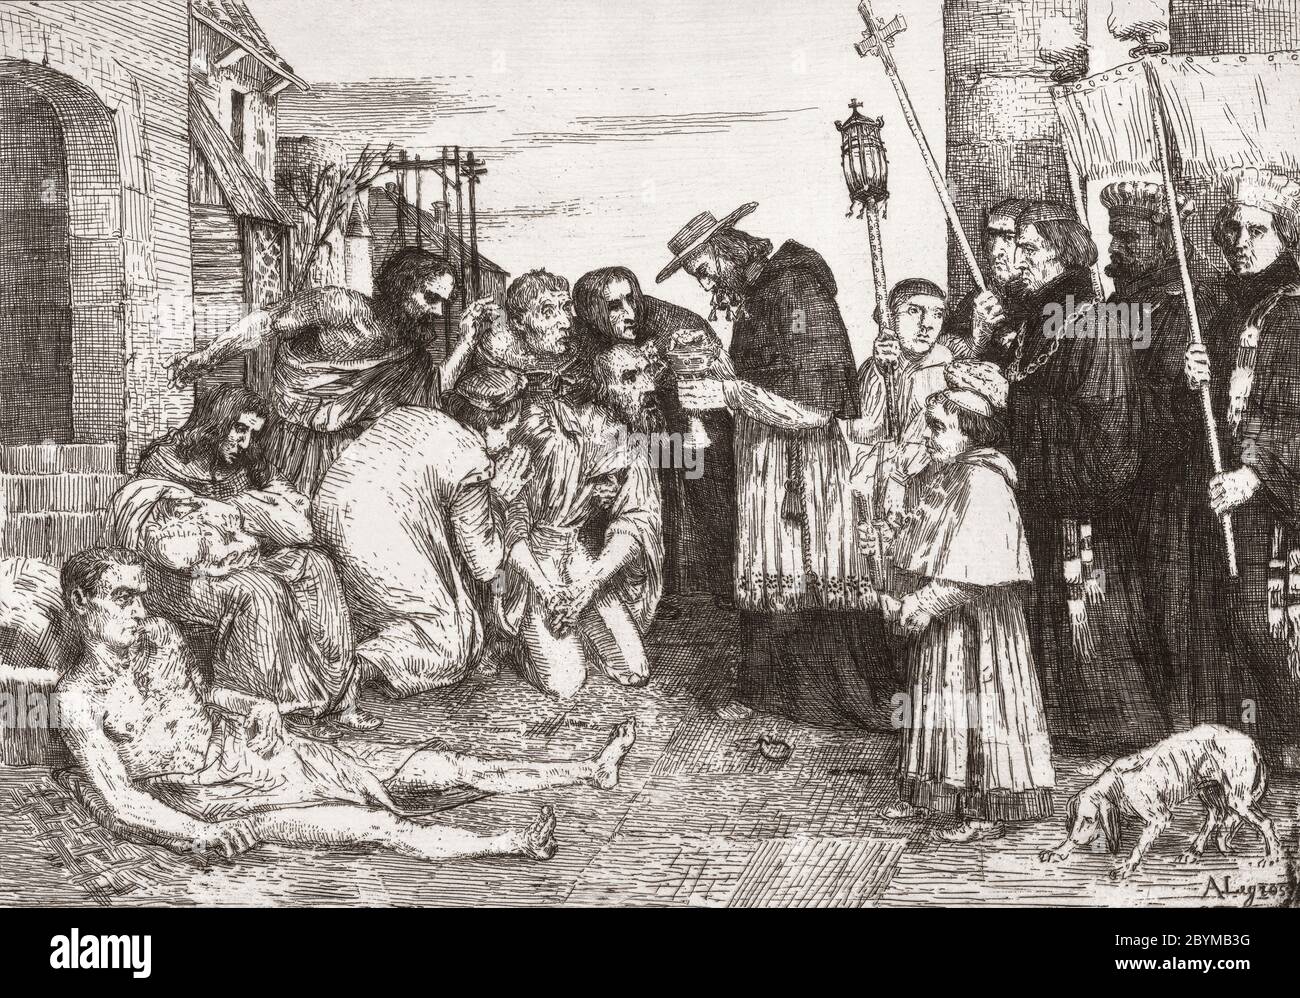 The Plague Victims of Rome, after an etching by French artist Alphonse Legros, 1837 - 1911.  People stricken with the plague receive the last sacrament from a cardinal who is atteneded by altar boys and priests. Stock Photo